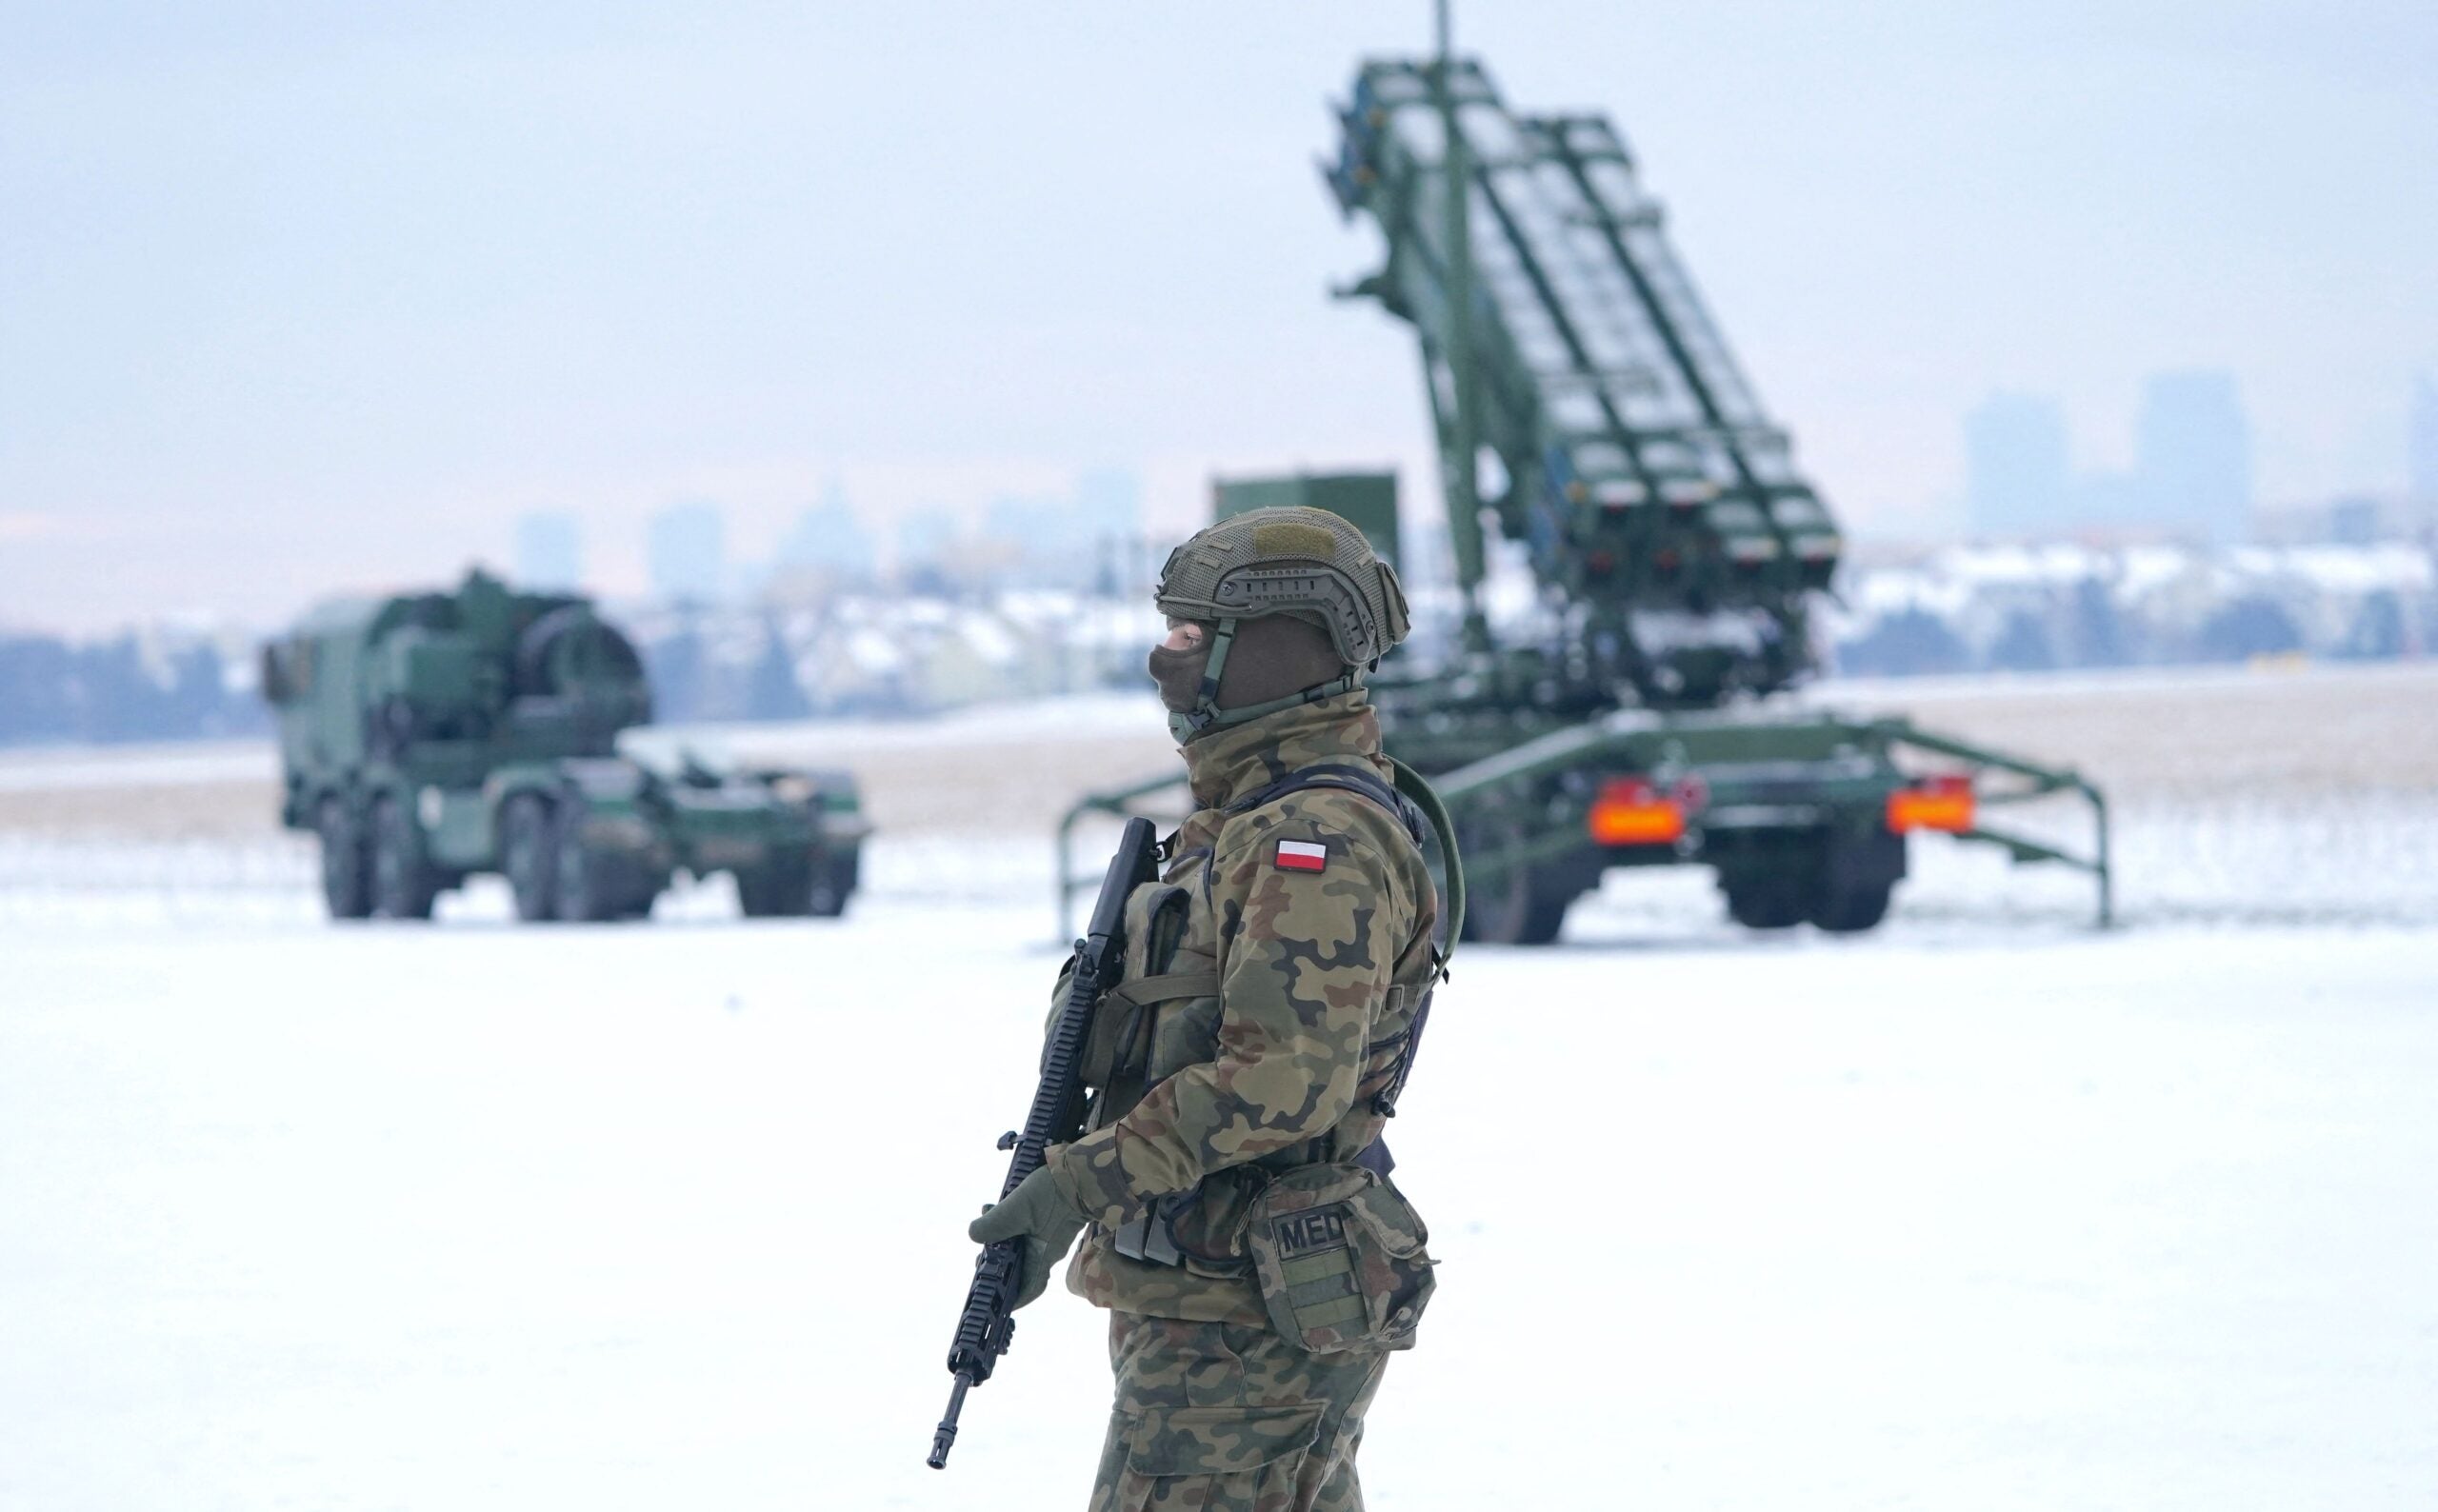 A soldier stands in front of a PATRIOT (Phased Array Tracking Radar to Intercept on Target) surface-to-air missile system during a military exercise at Warsaw Babice Airport, Poland on February 7, 2023. - Patriot missile systems purchased by Poland last year have been redeployed to the Polish captital for military exercises. (Photo by JANEK SKARZYNSKI / AFP) (Photo by JANEK SKARZYNSKI/AFP via Getty Images)